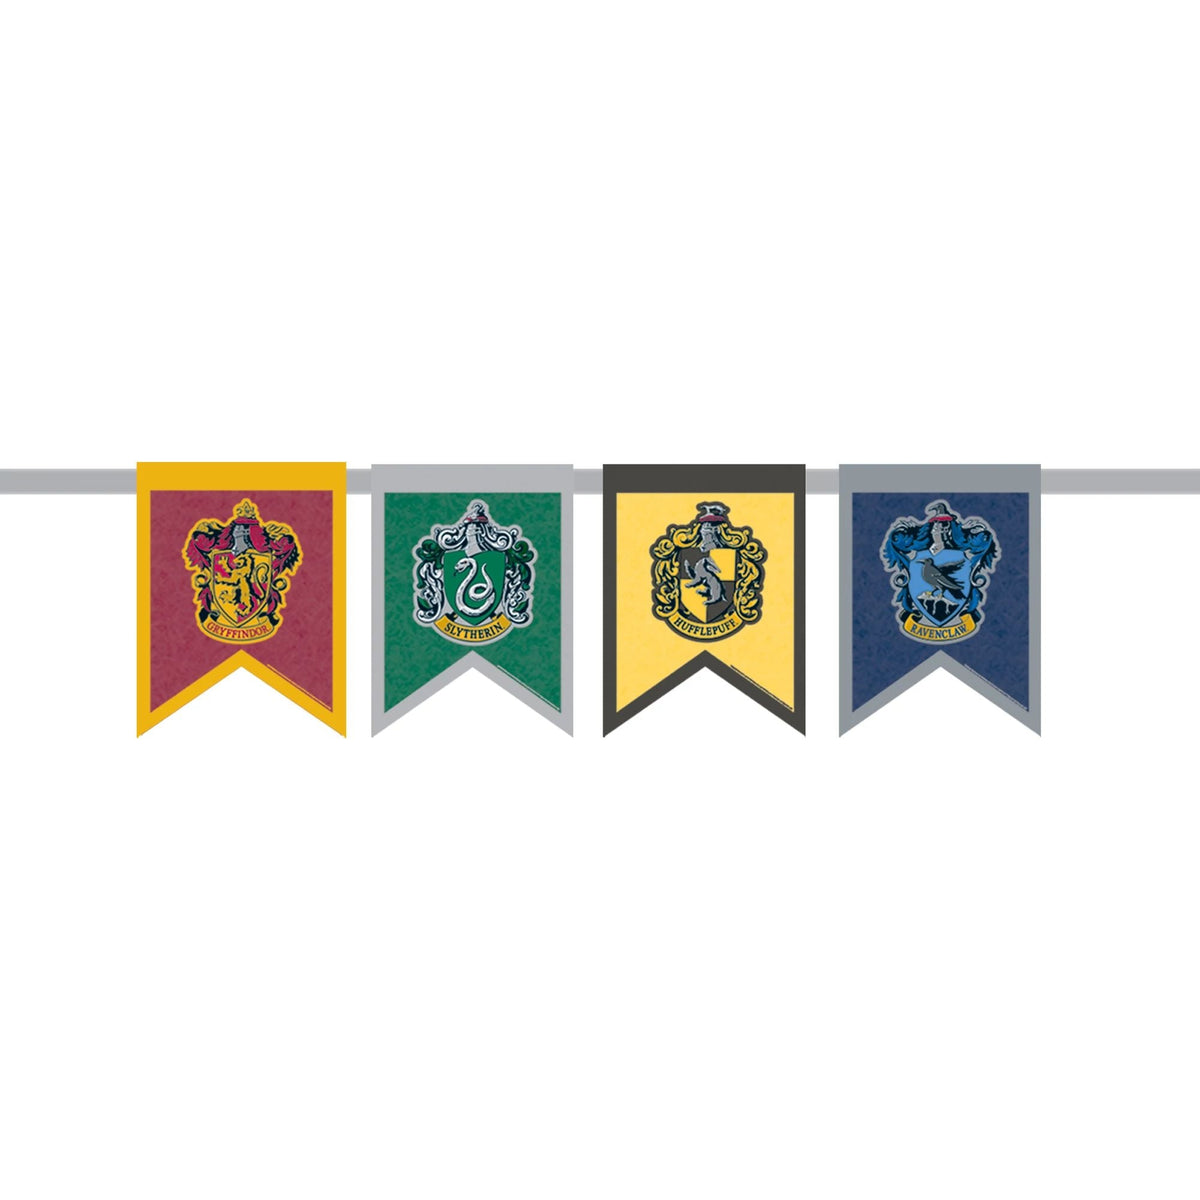 AMSCAN CA Halloween Harry Potter House Crests Pennant Felt Banner, 16.5 x 72 Inches, 1 Count